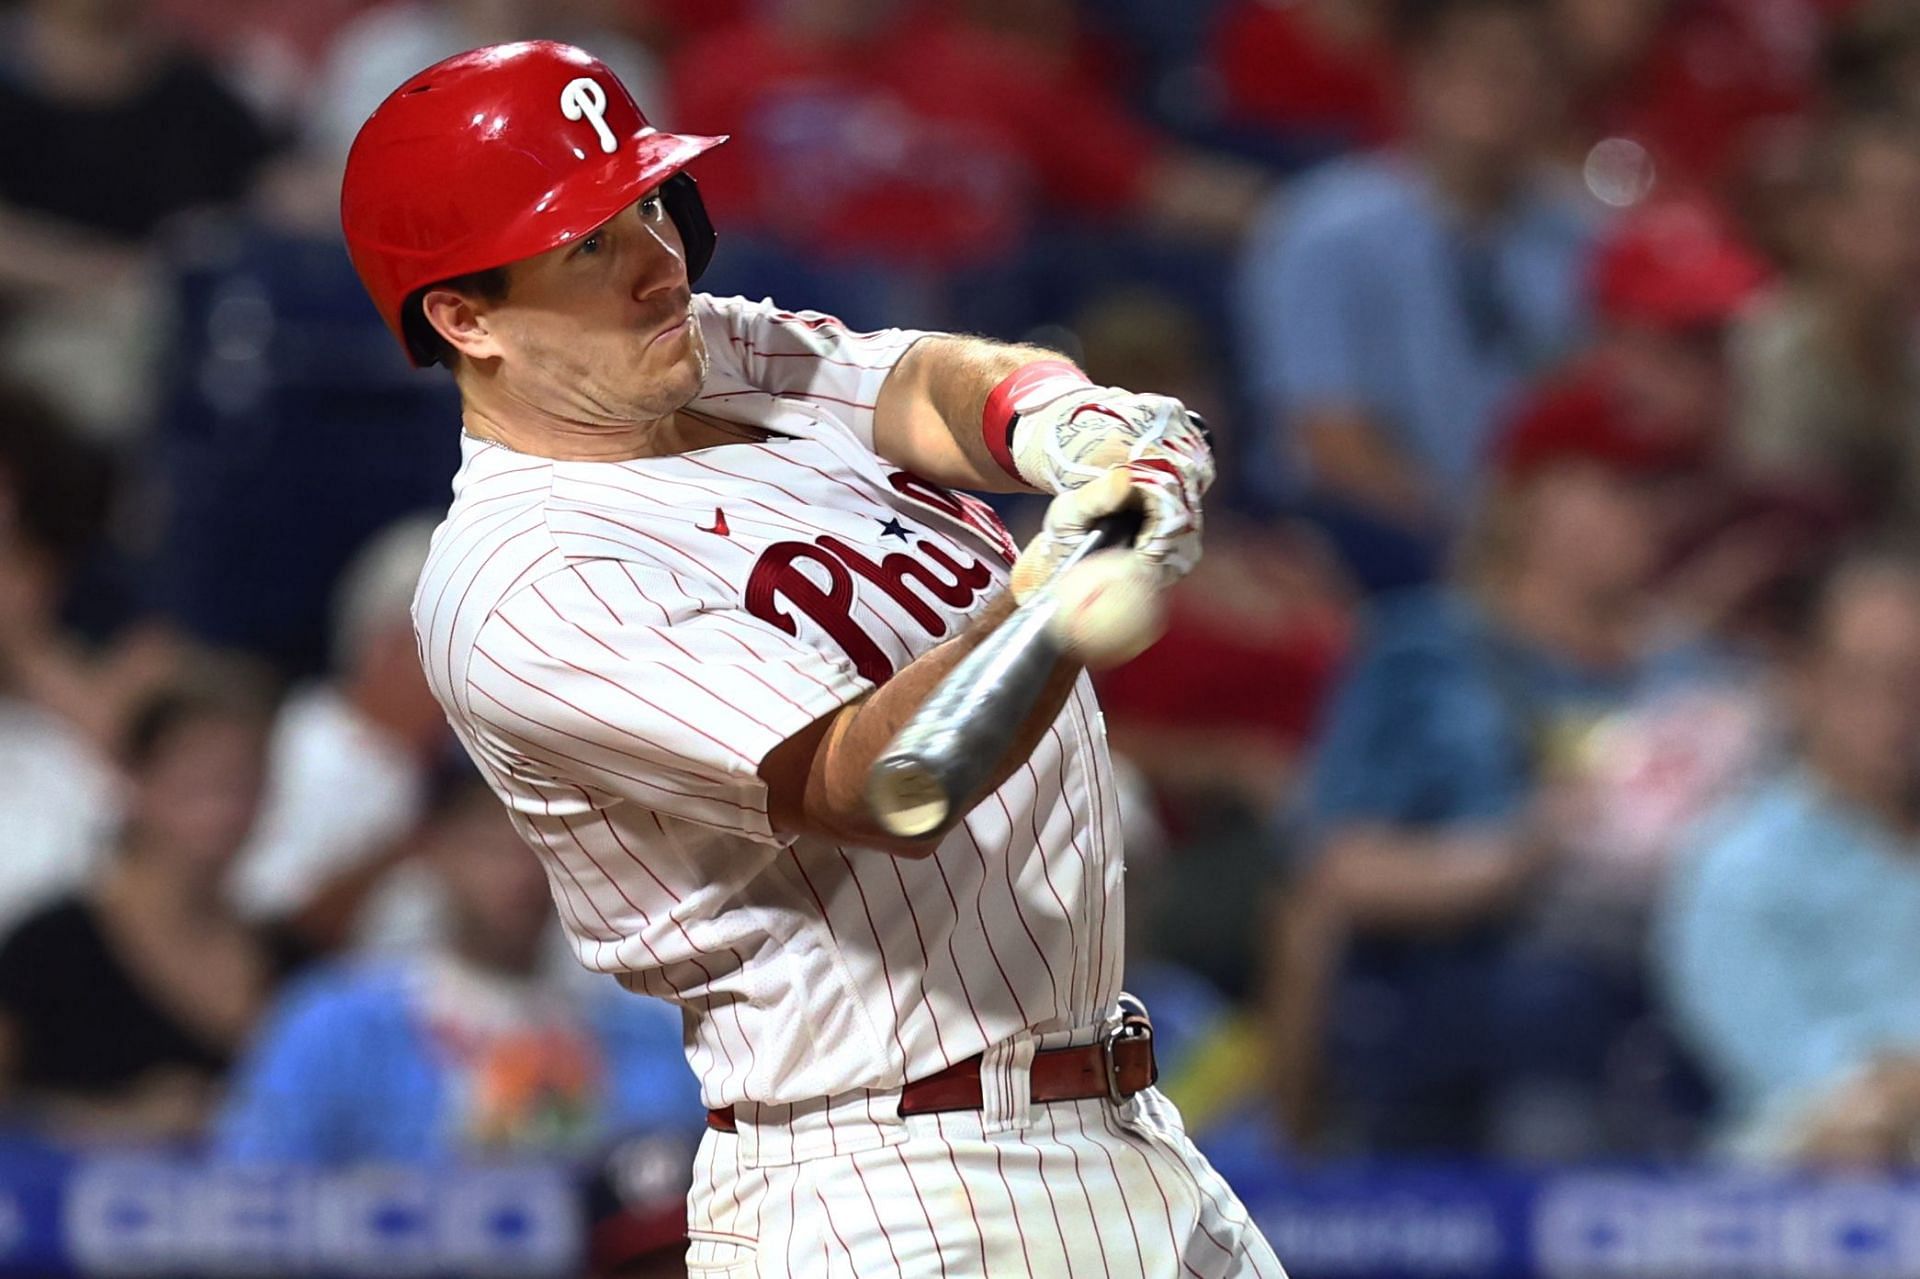 Washington Nationals v Philadelphia Phillies: PHILADELPHIA, PA - AUGUST 06: J.T. Realmuto #10 of the Philadelphia Phillies hits a two-run home run against the Washington Nationals during the sixth inning of a game at Citizens Bank Park on August 6, 2022, in Philadelphia, Pennsylvania. (Photo by Rich Schultz/Getty Images)